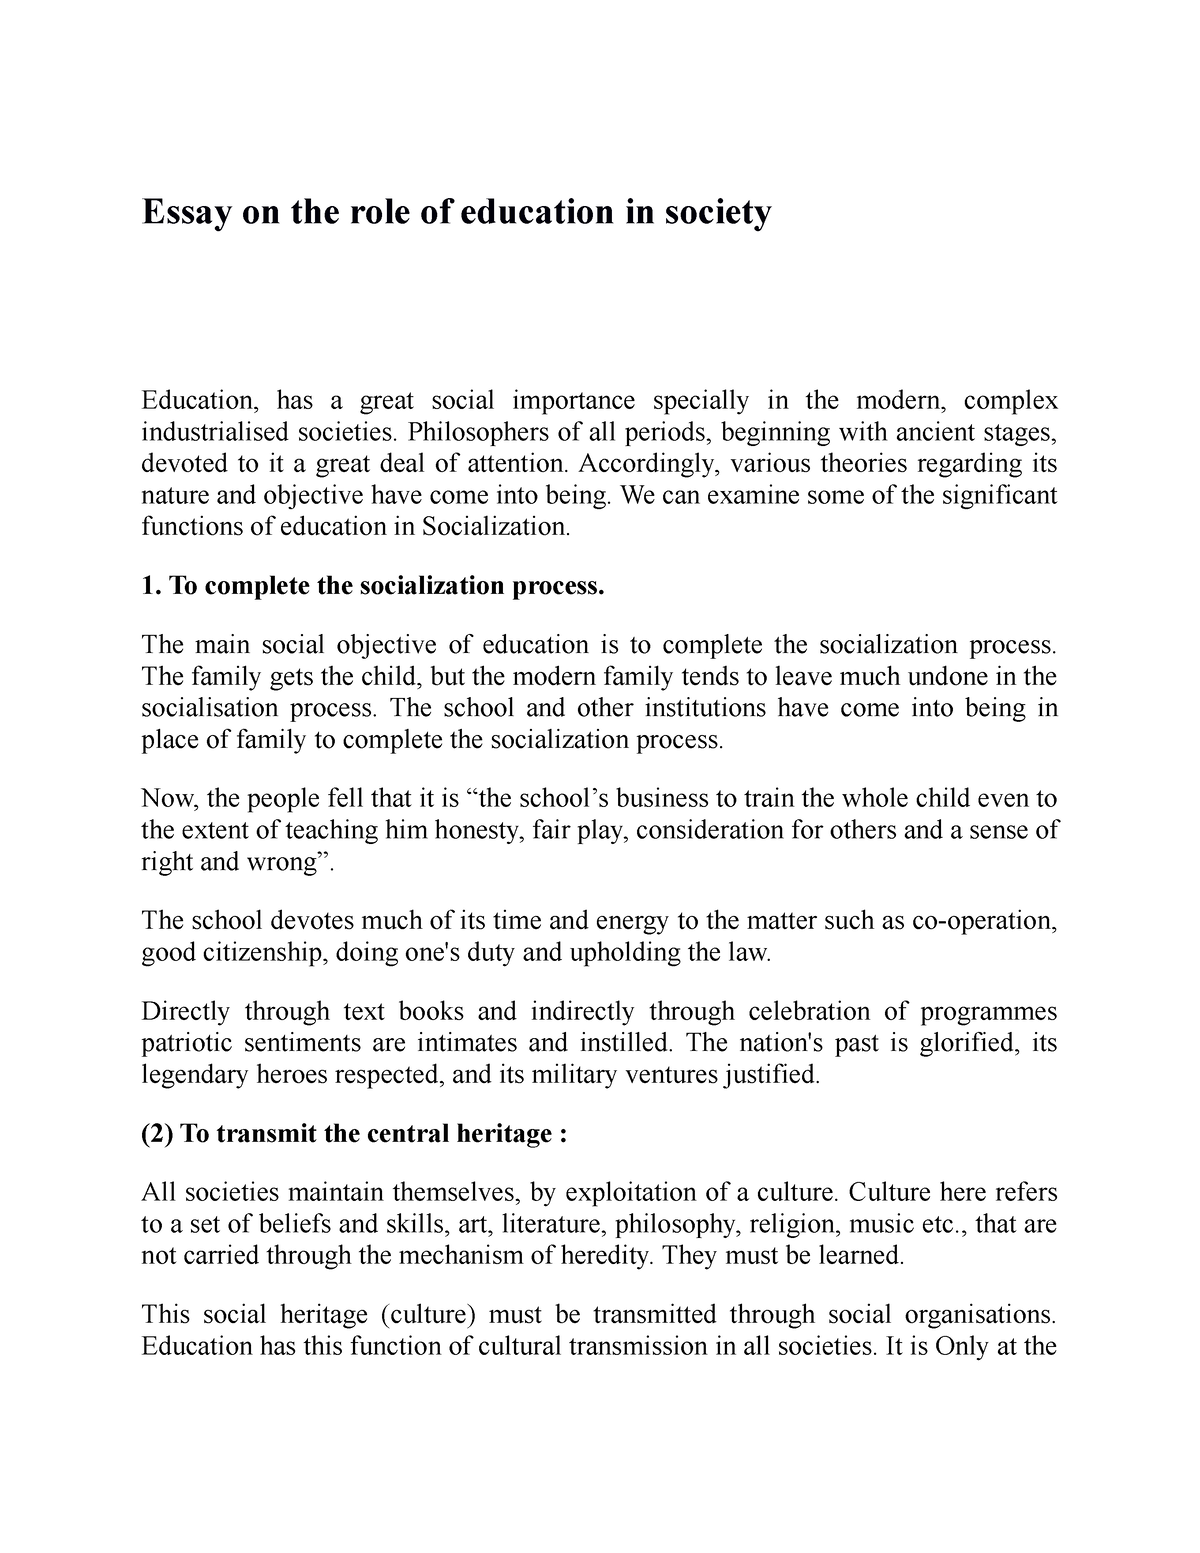 write an essay about the role of education in society